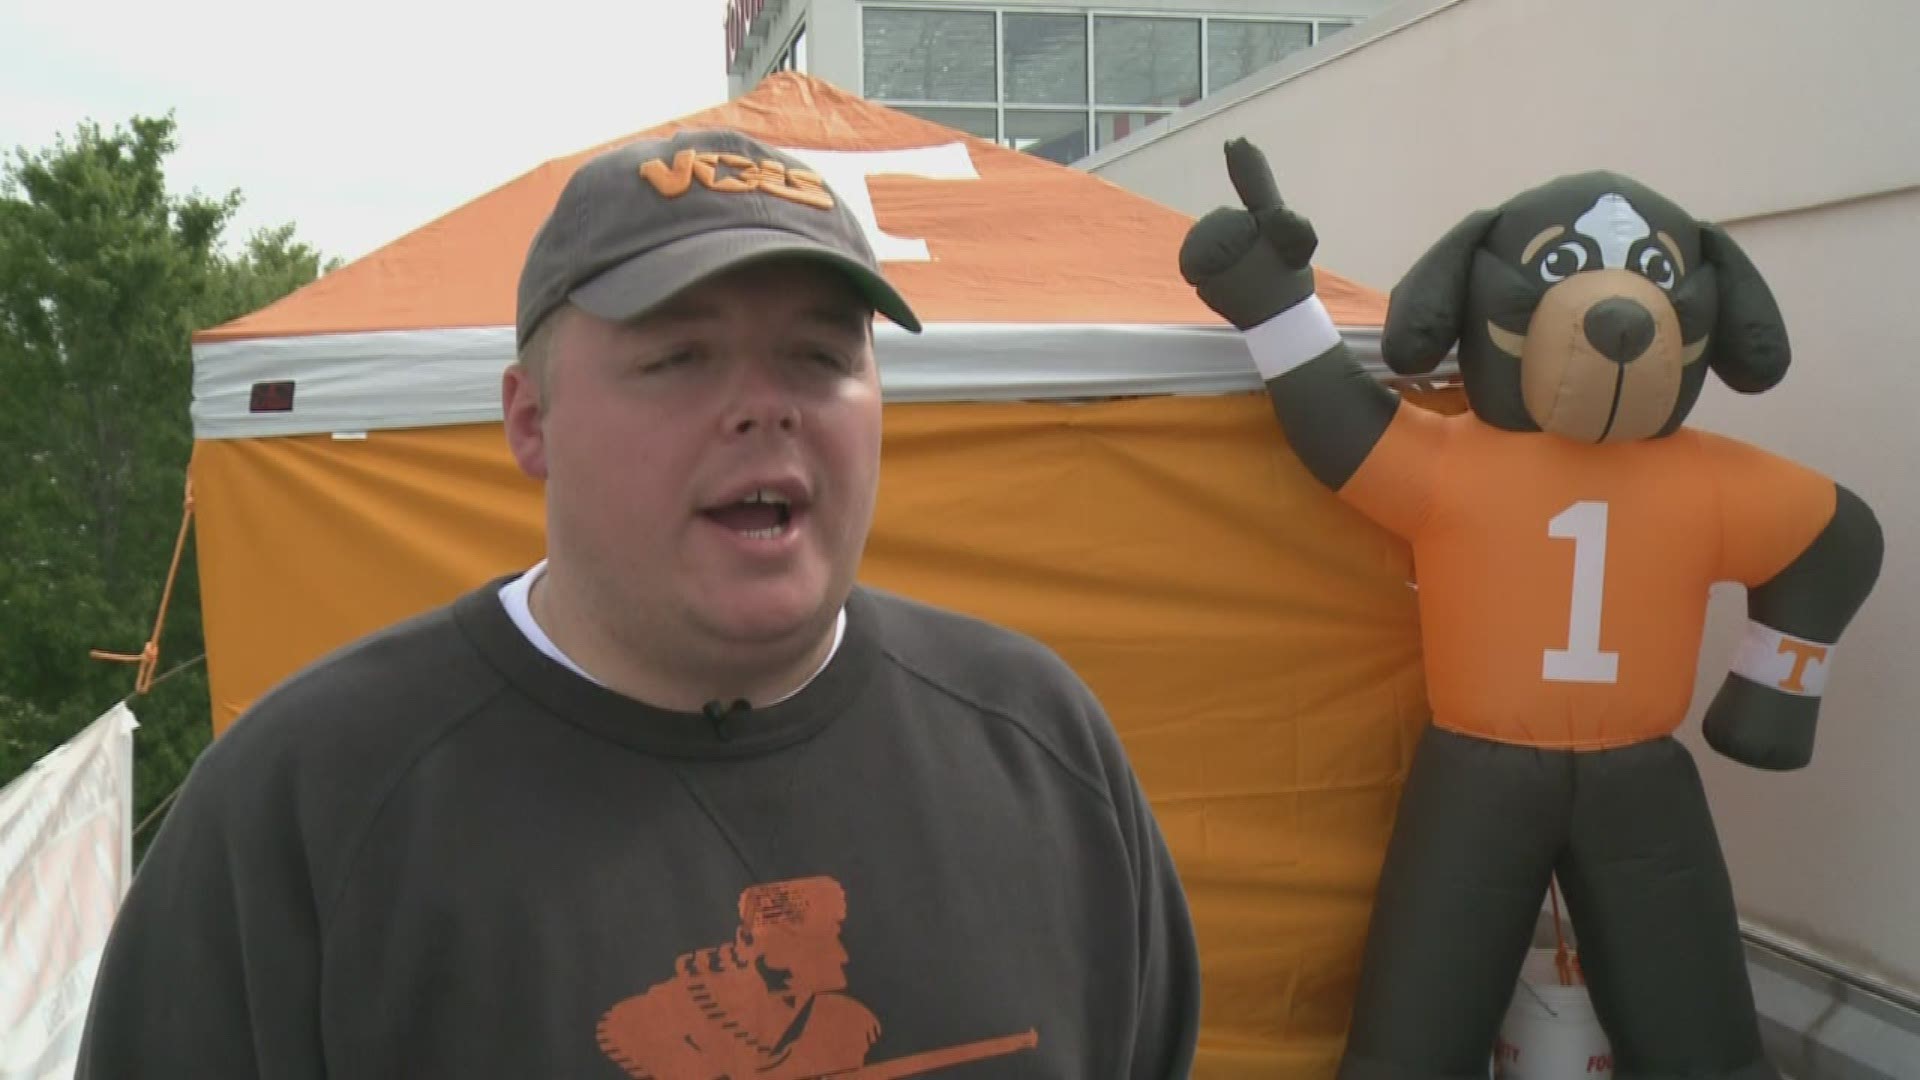 WNML morning co-host Tyler Ivens is now vowing to sleep on the roof of a local business until the Vols get their next win.